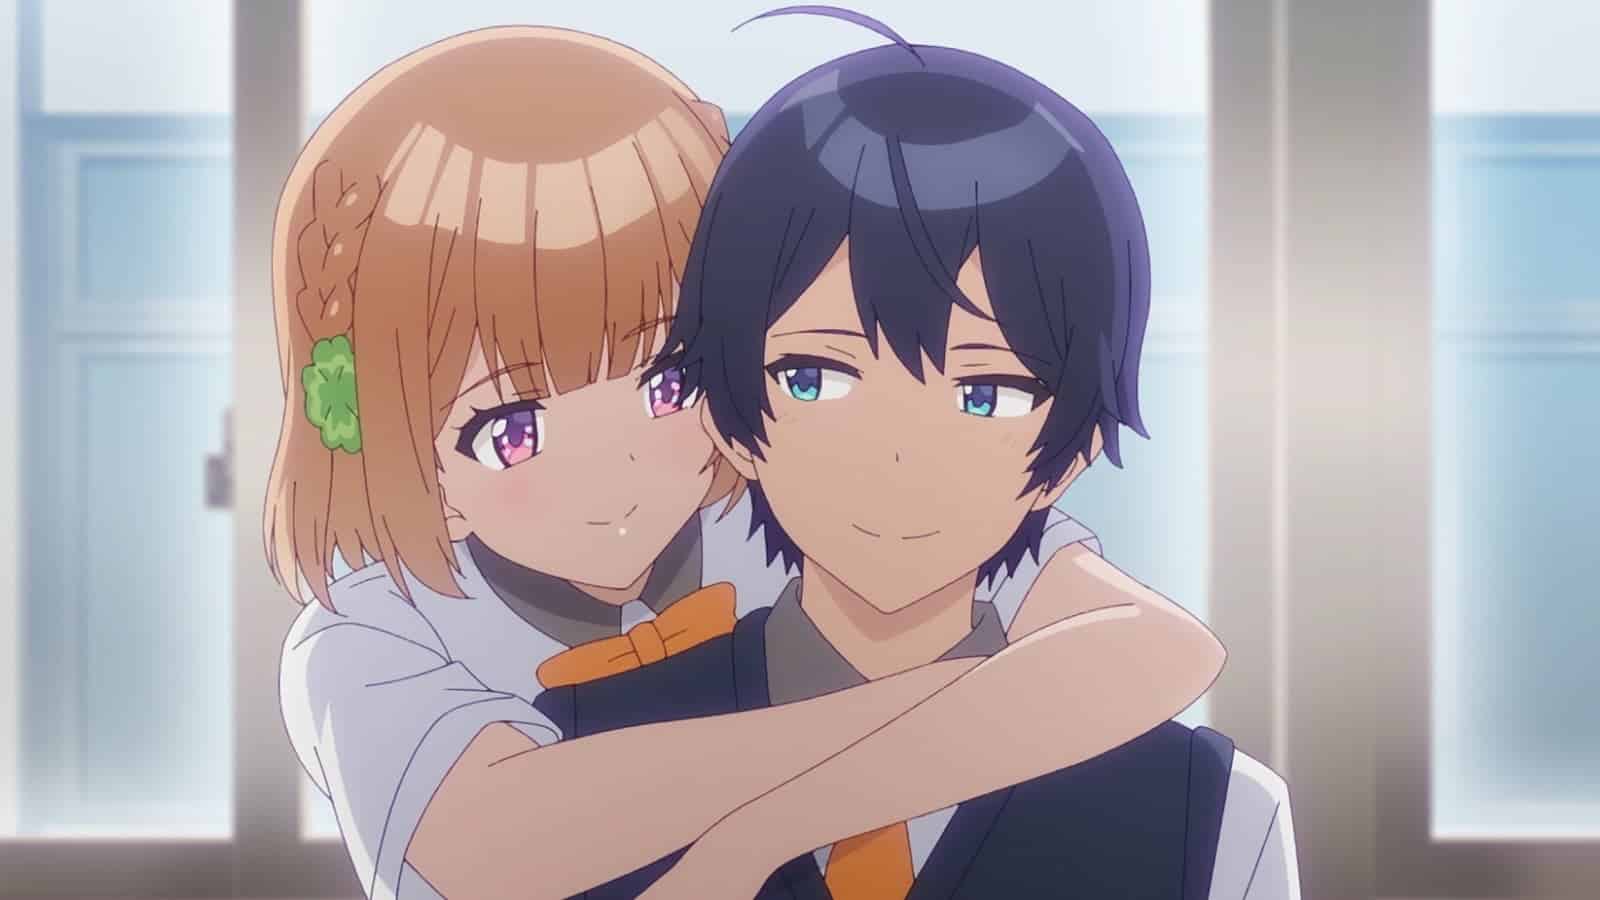 One Of The Best Anime Like A Couple Of Cuckoos: Osamake: Romcom Where The Childhood Friend Won’t Lose